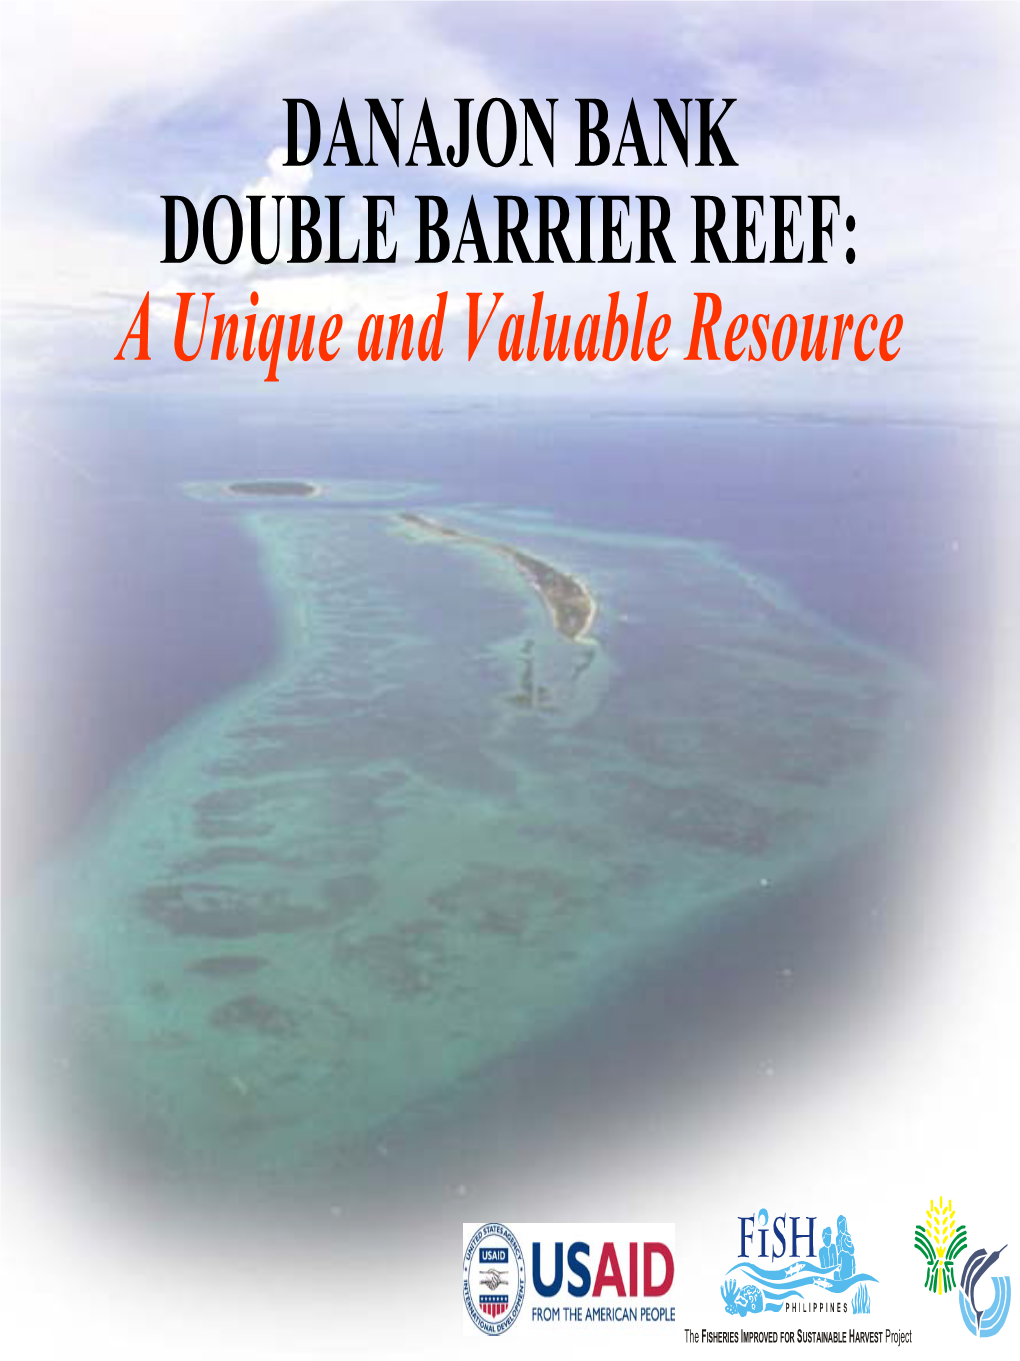 DANAJON BANK DOUBLE BARRIER REEF: a Unique and Valuable Resource